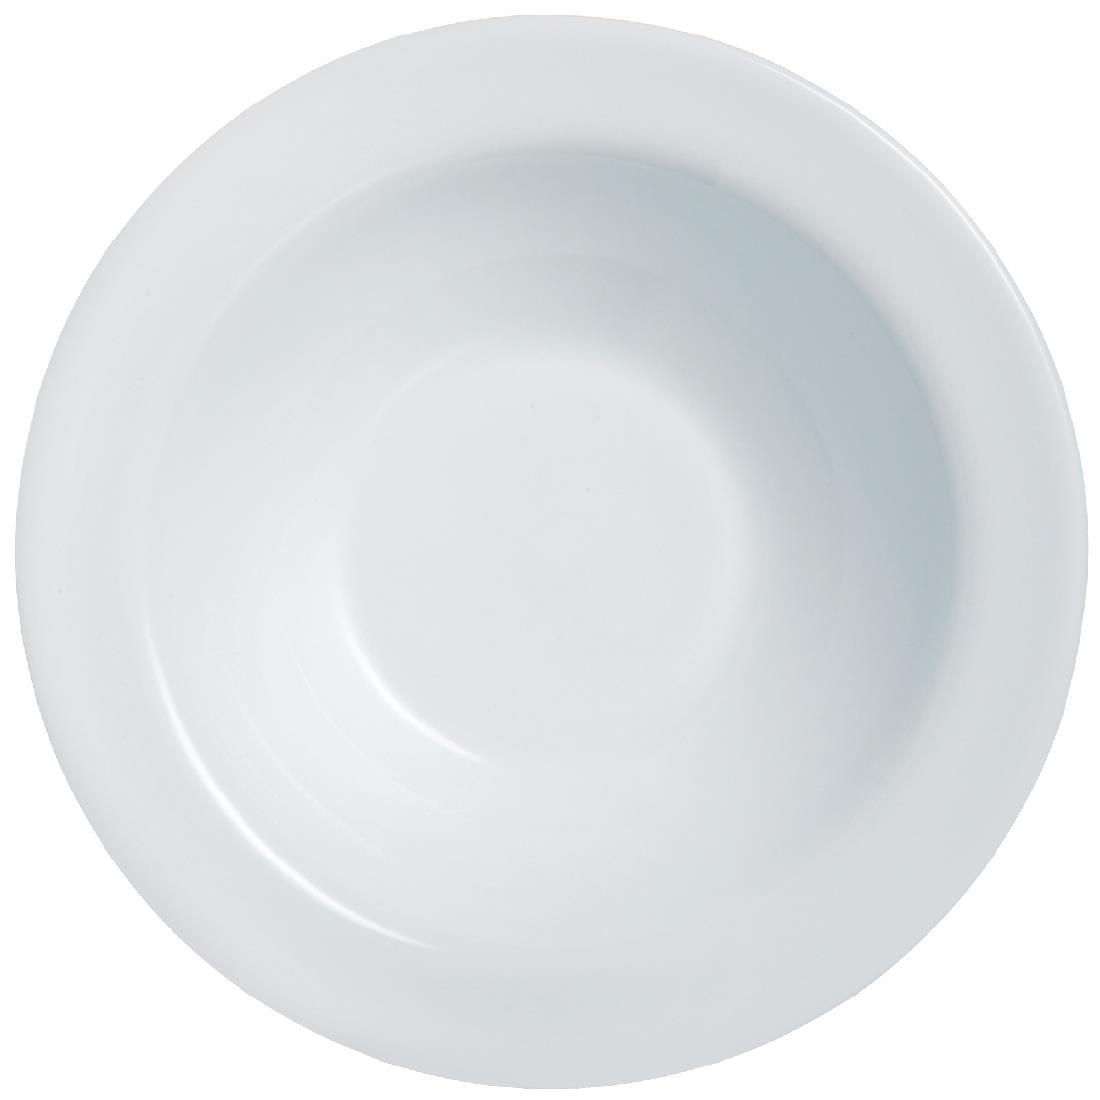 Arcoroc Opal Rimmed Bowls 160mm (Pack of 6) - DP070  - 2